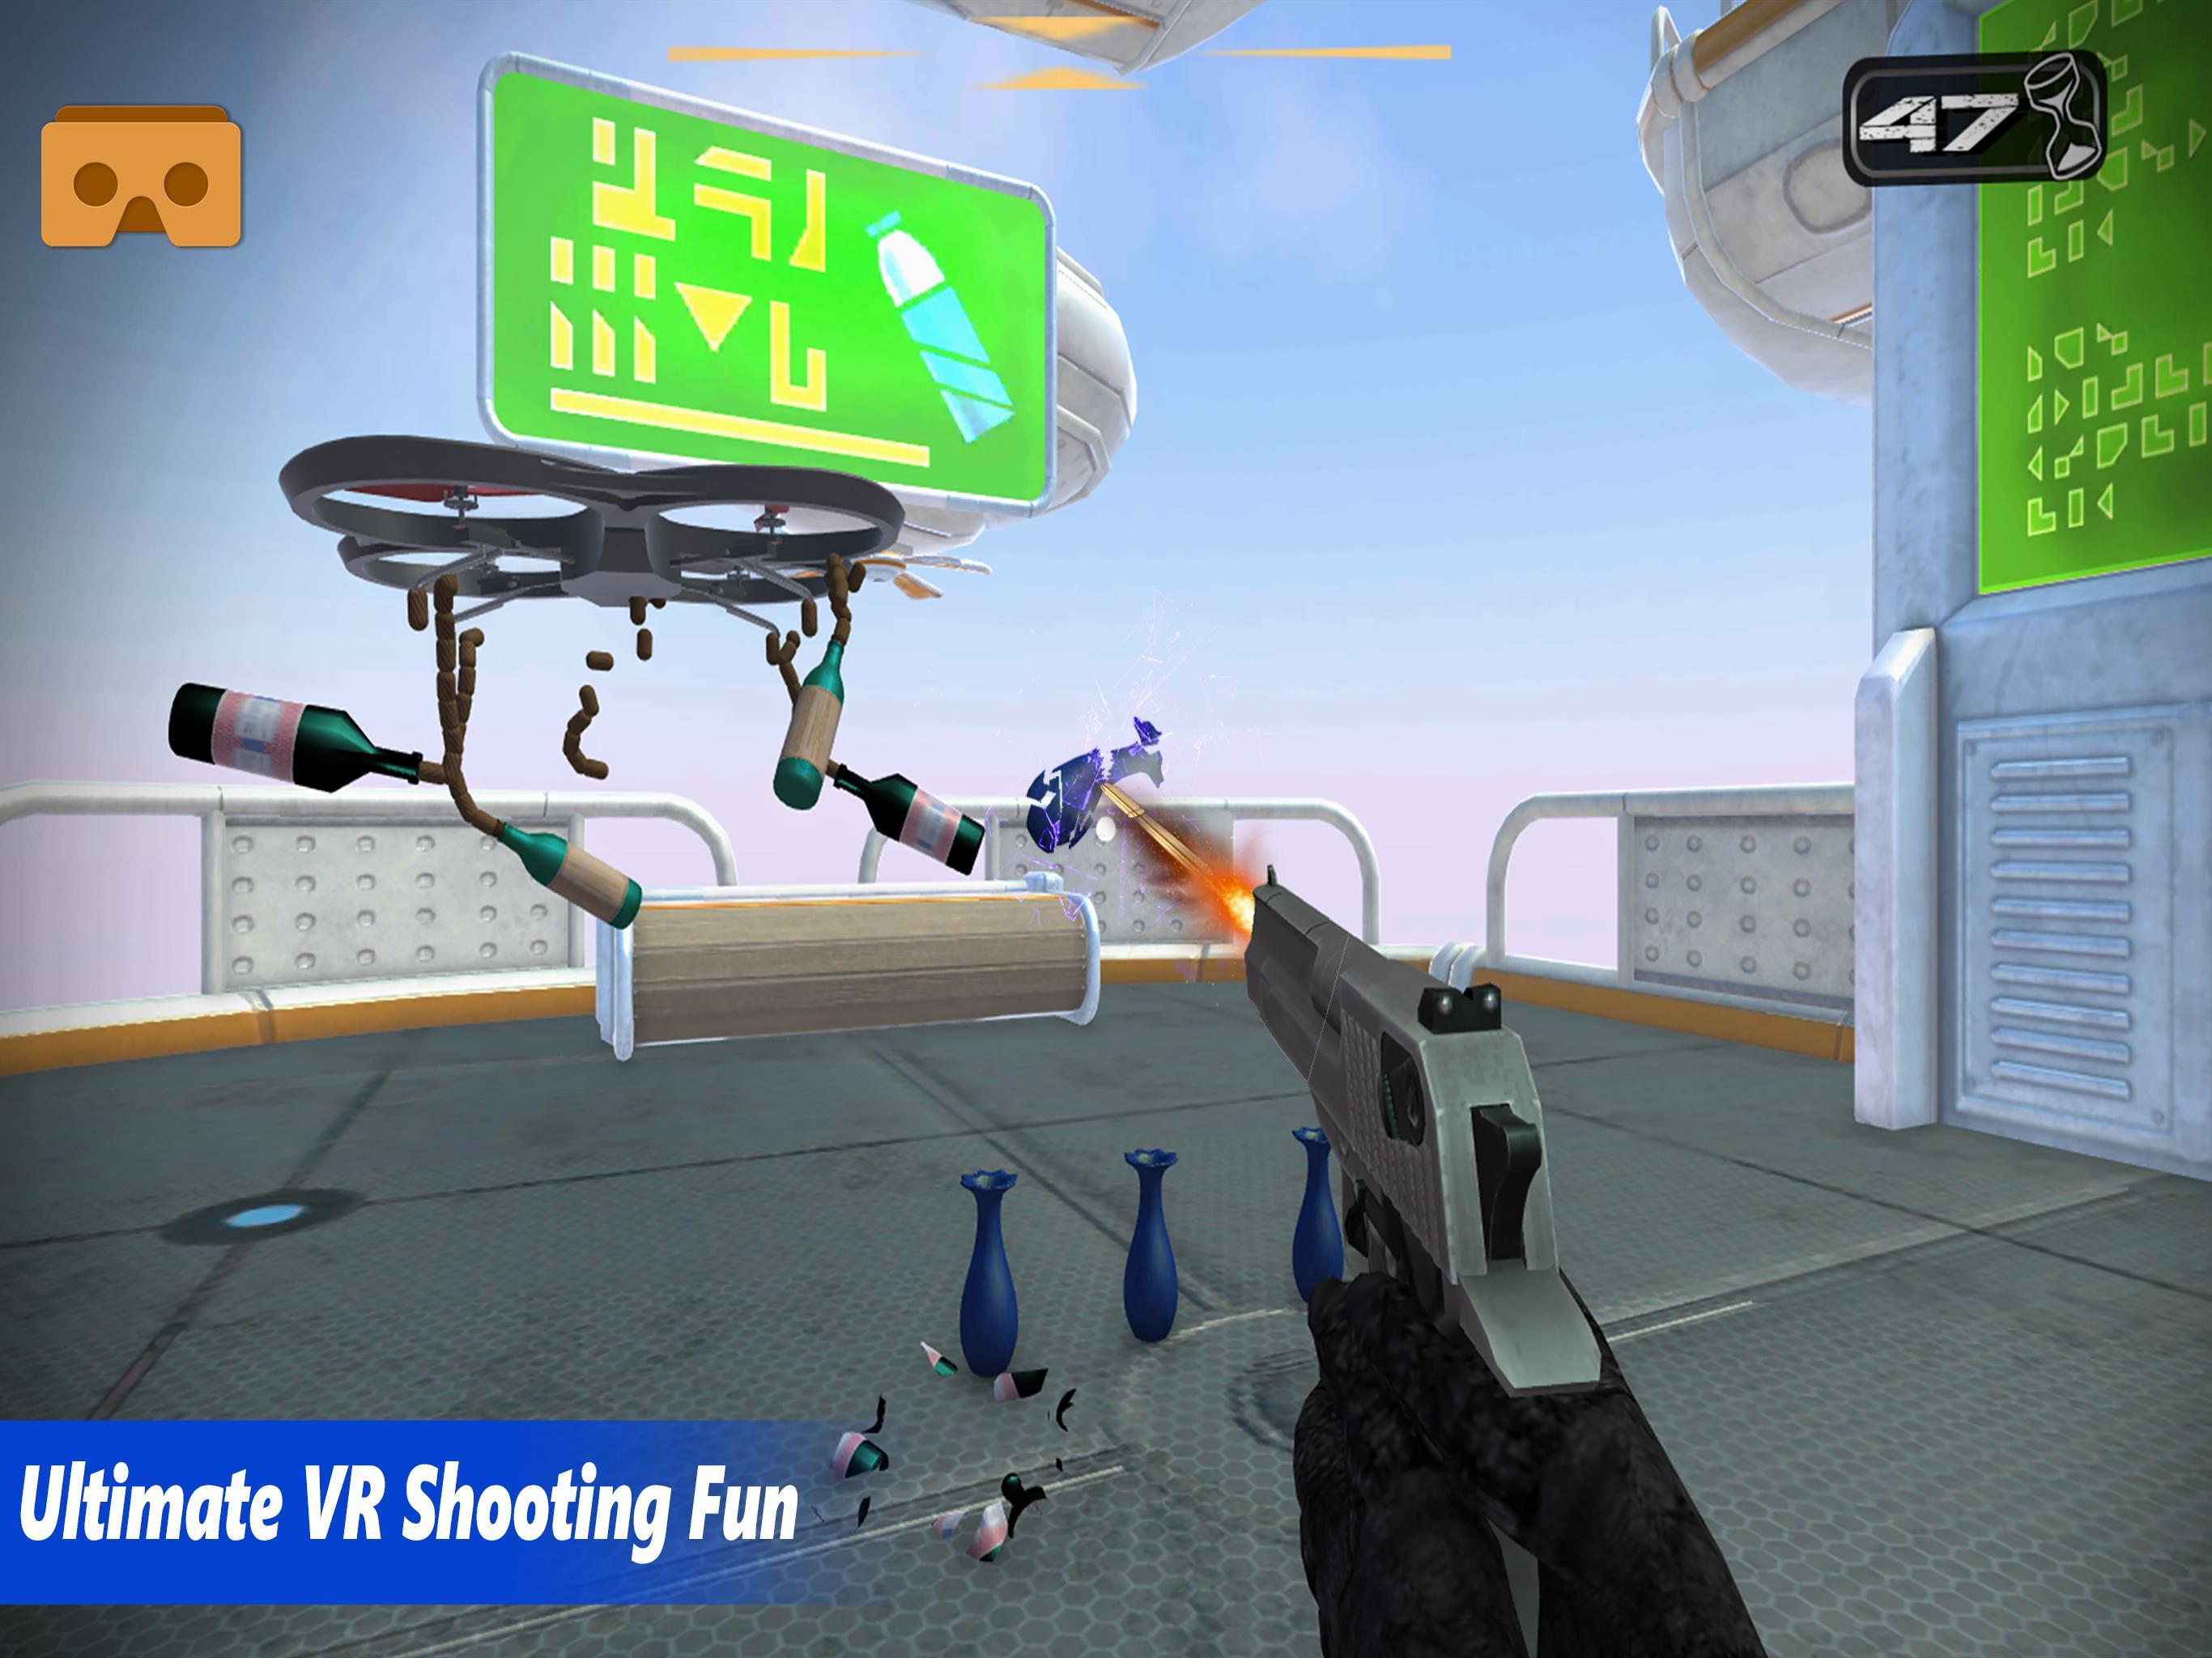 Expert Bottle Shooter VR Free Game for Android - APK Download